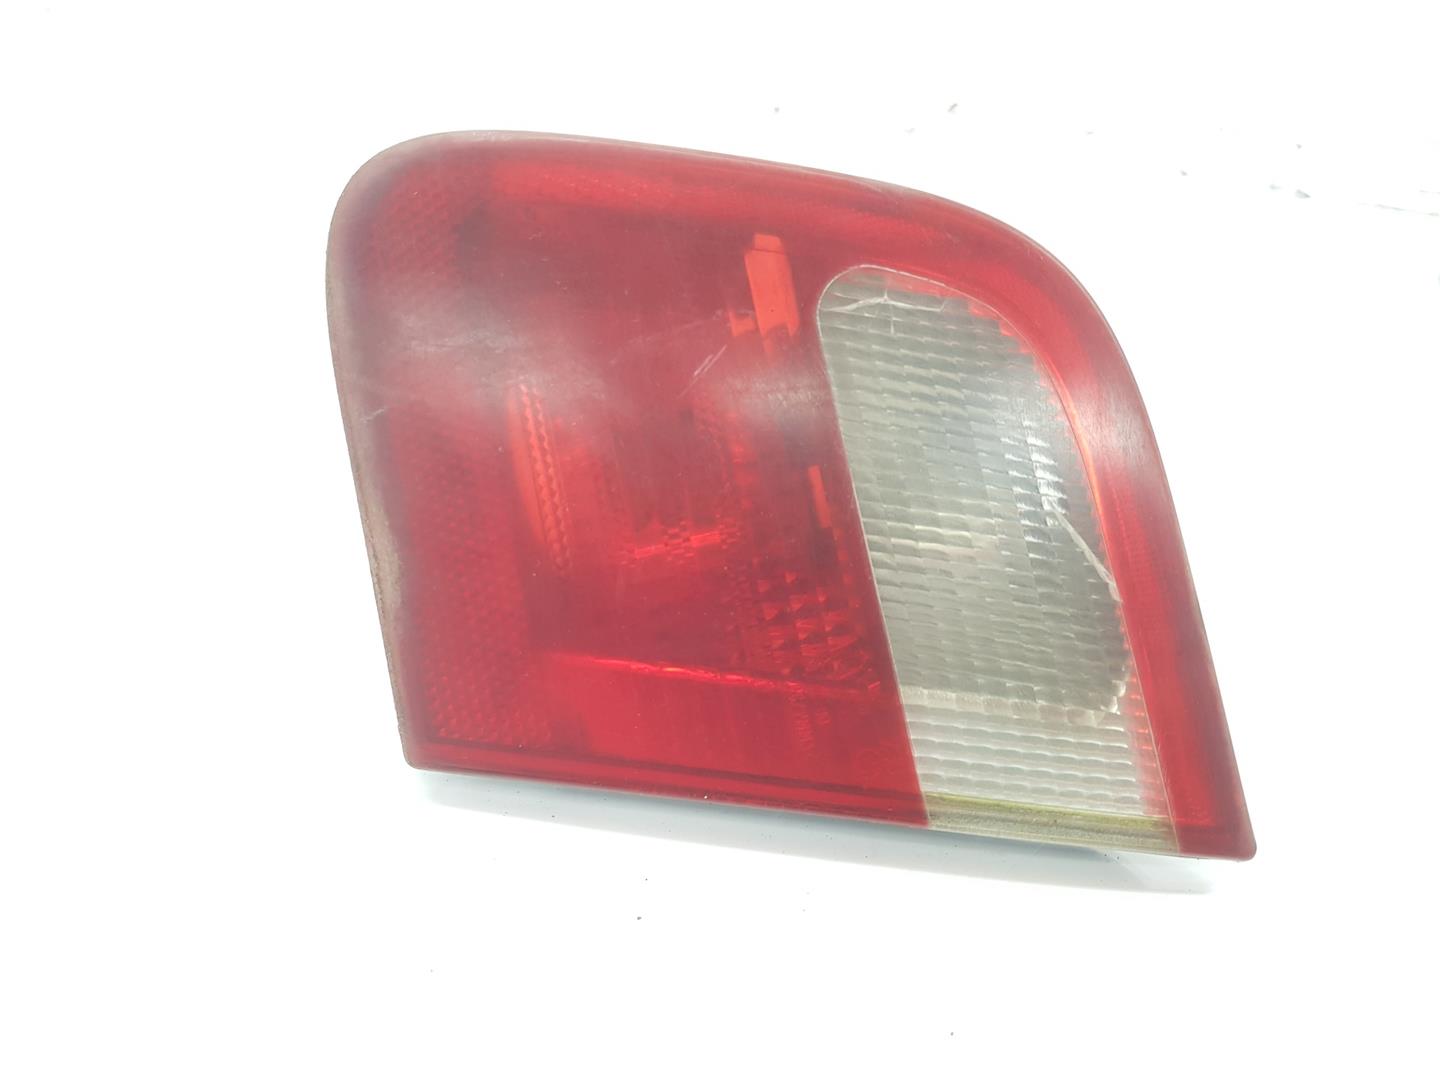 BMW 3 Series E46 (1997-2006) Rear Right Taillight Lamp 63218364924, 63218364924 24136585